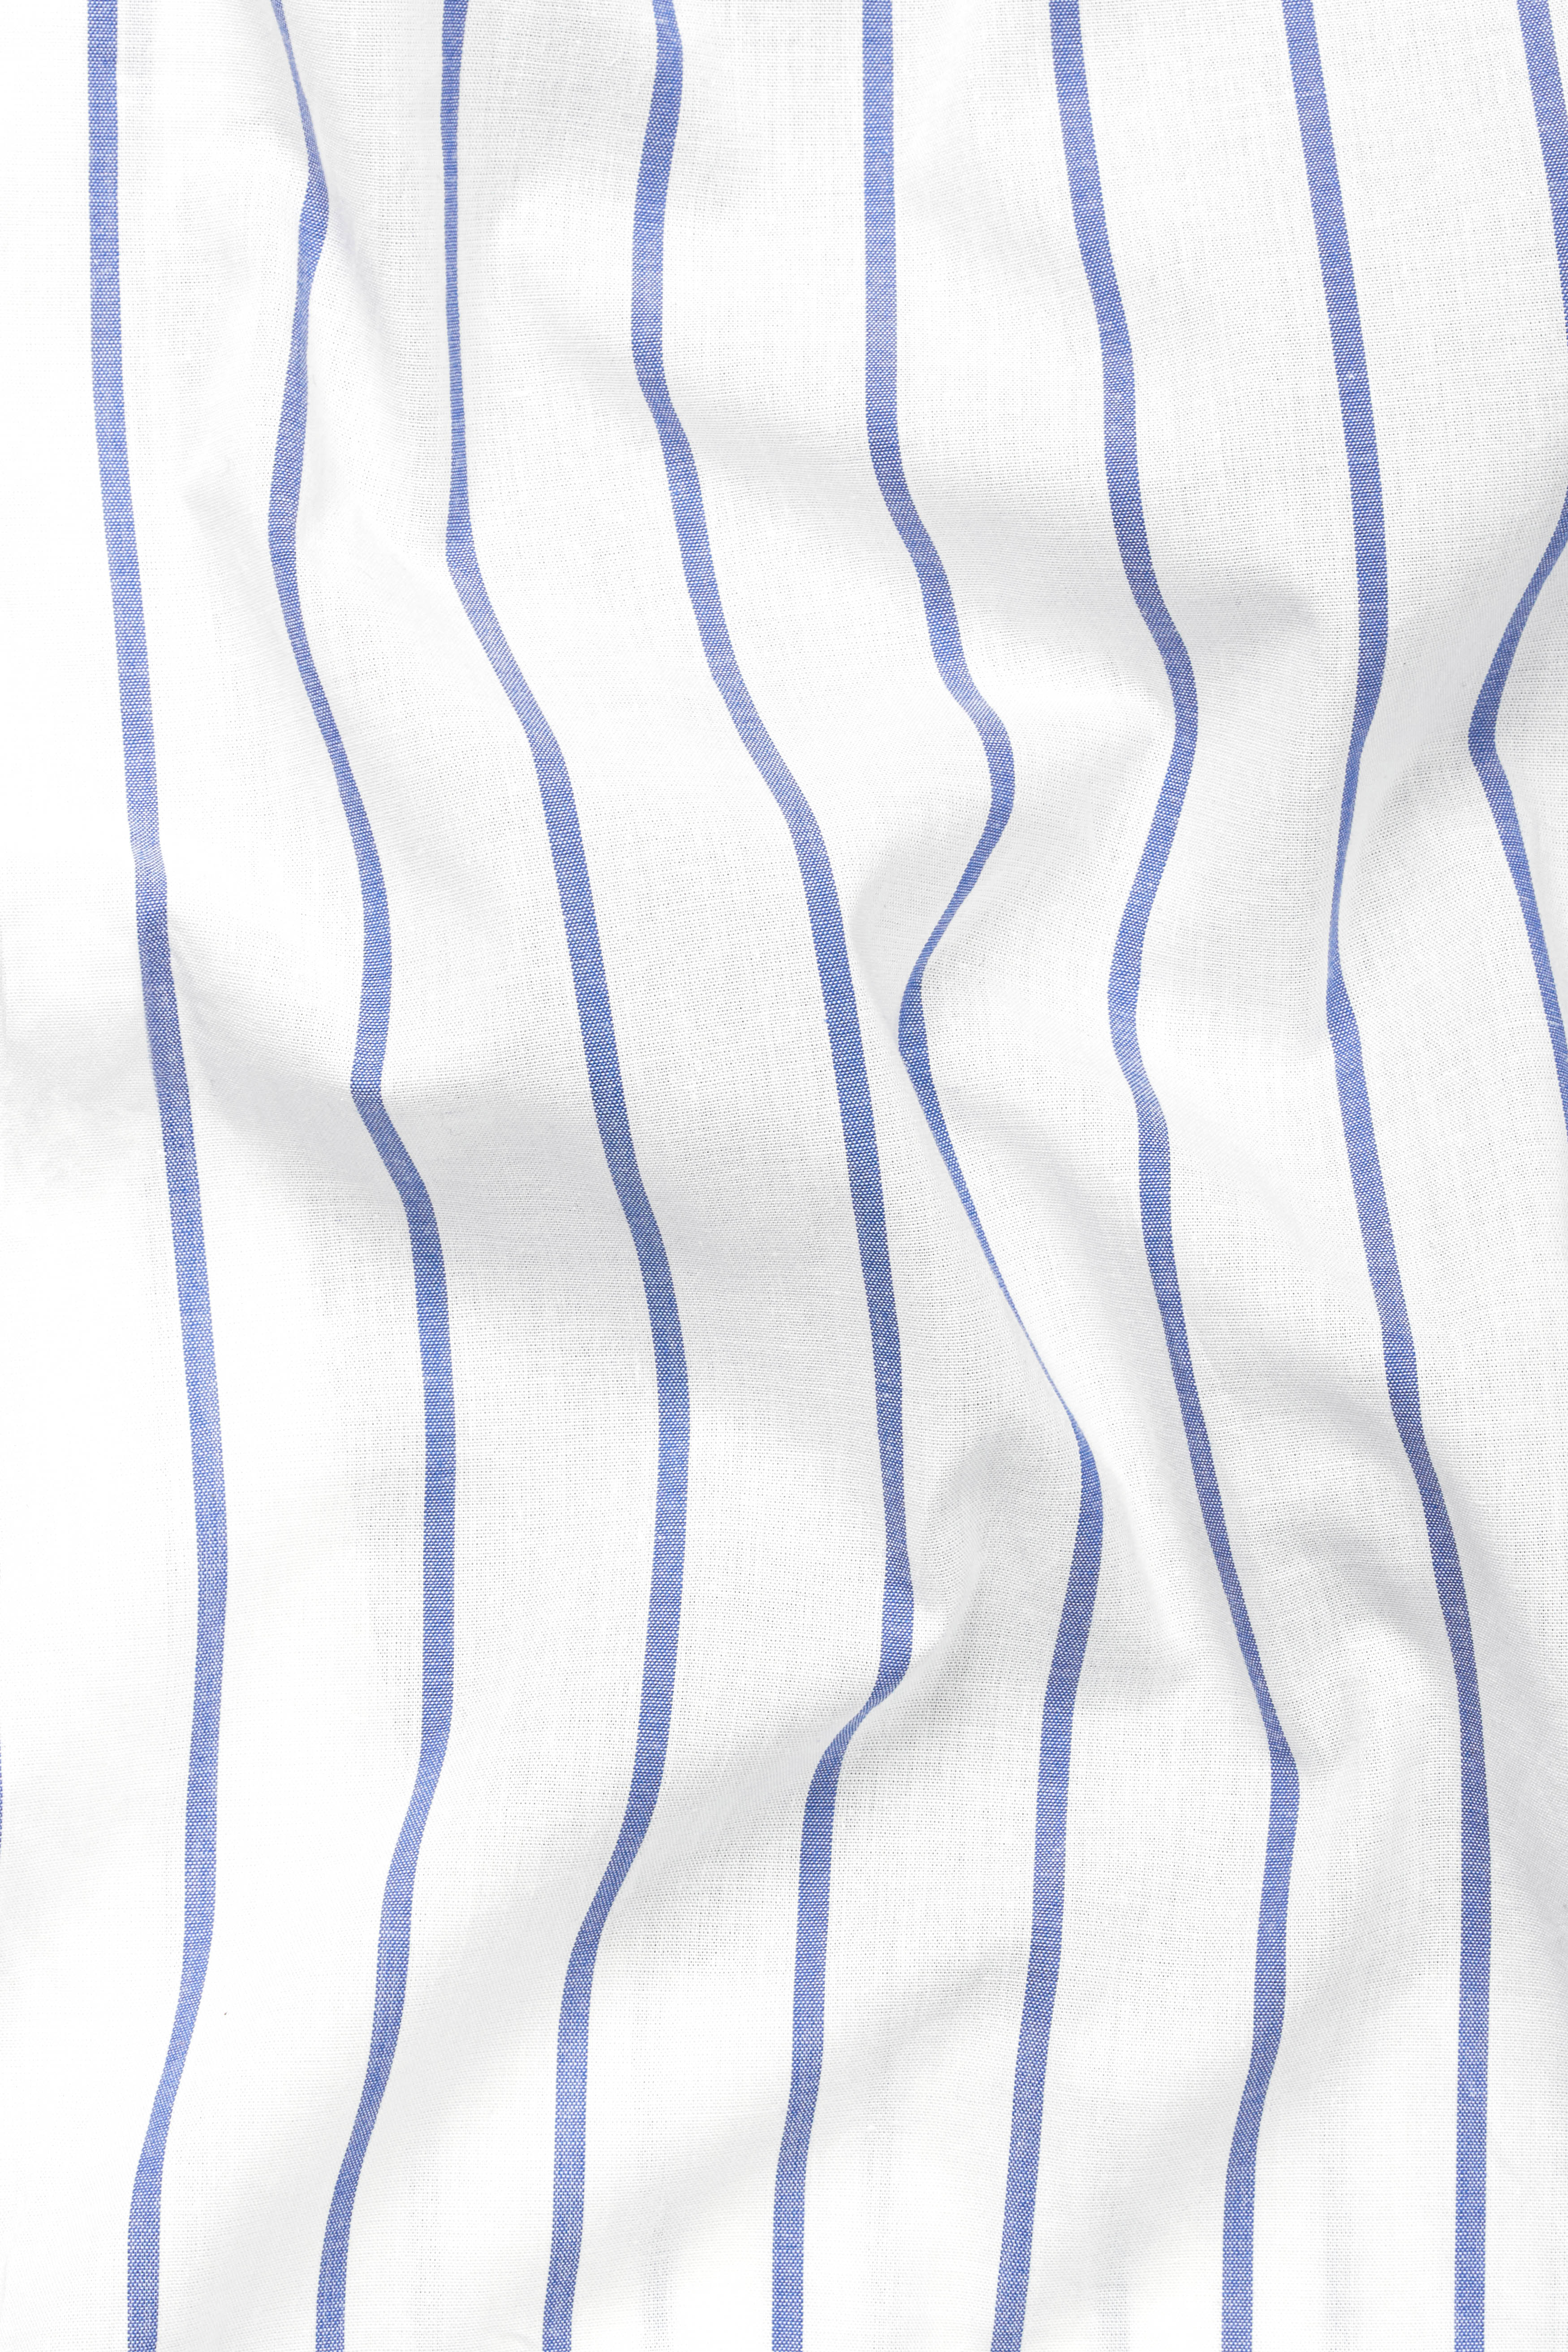 Bright White with Faded Blue Striped Premium Cotton Shirt